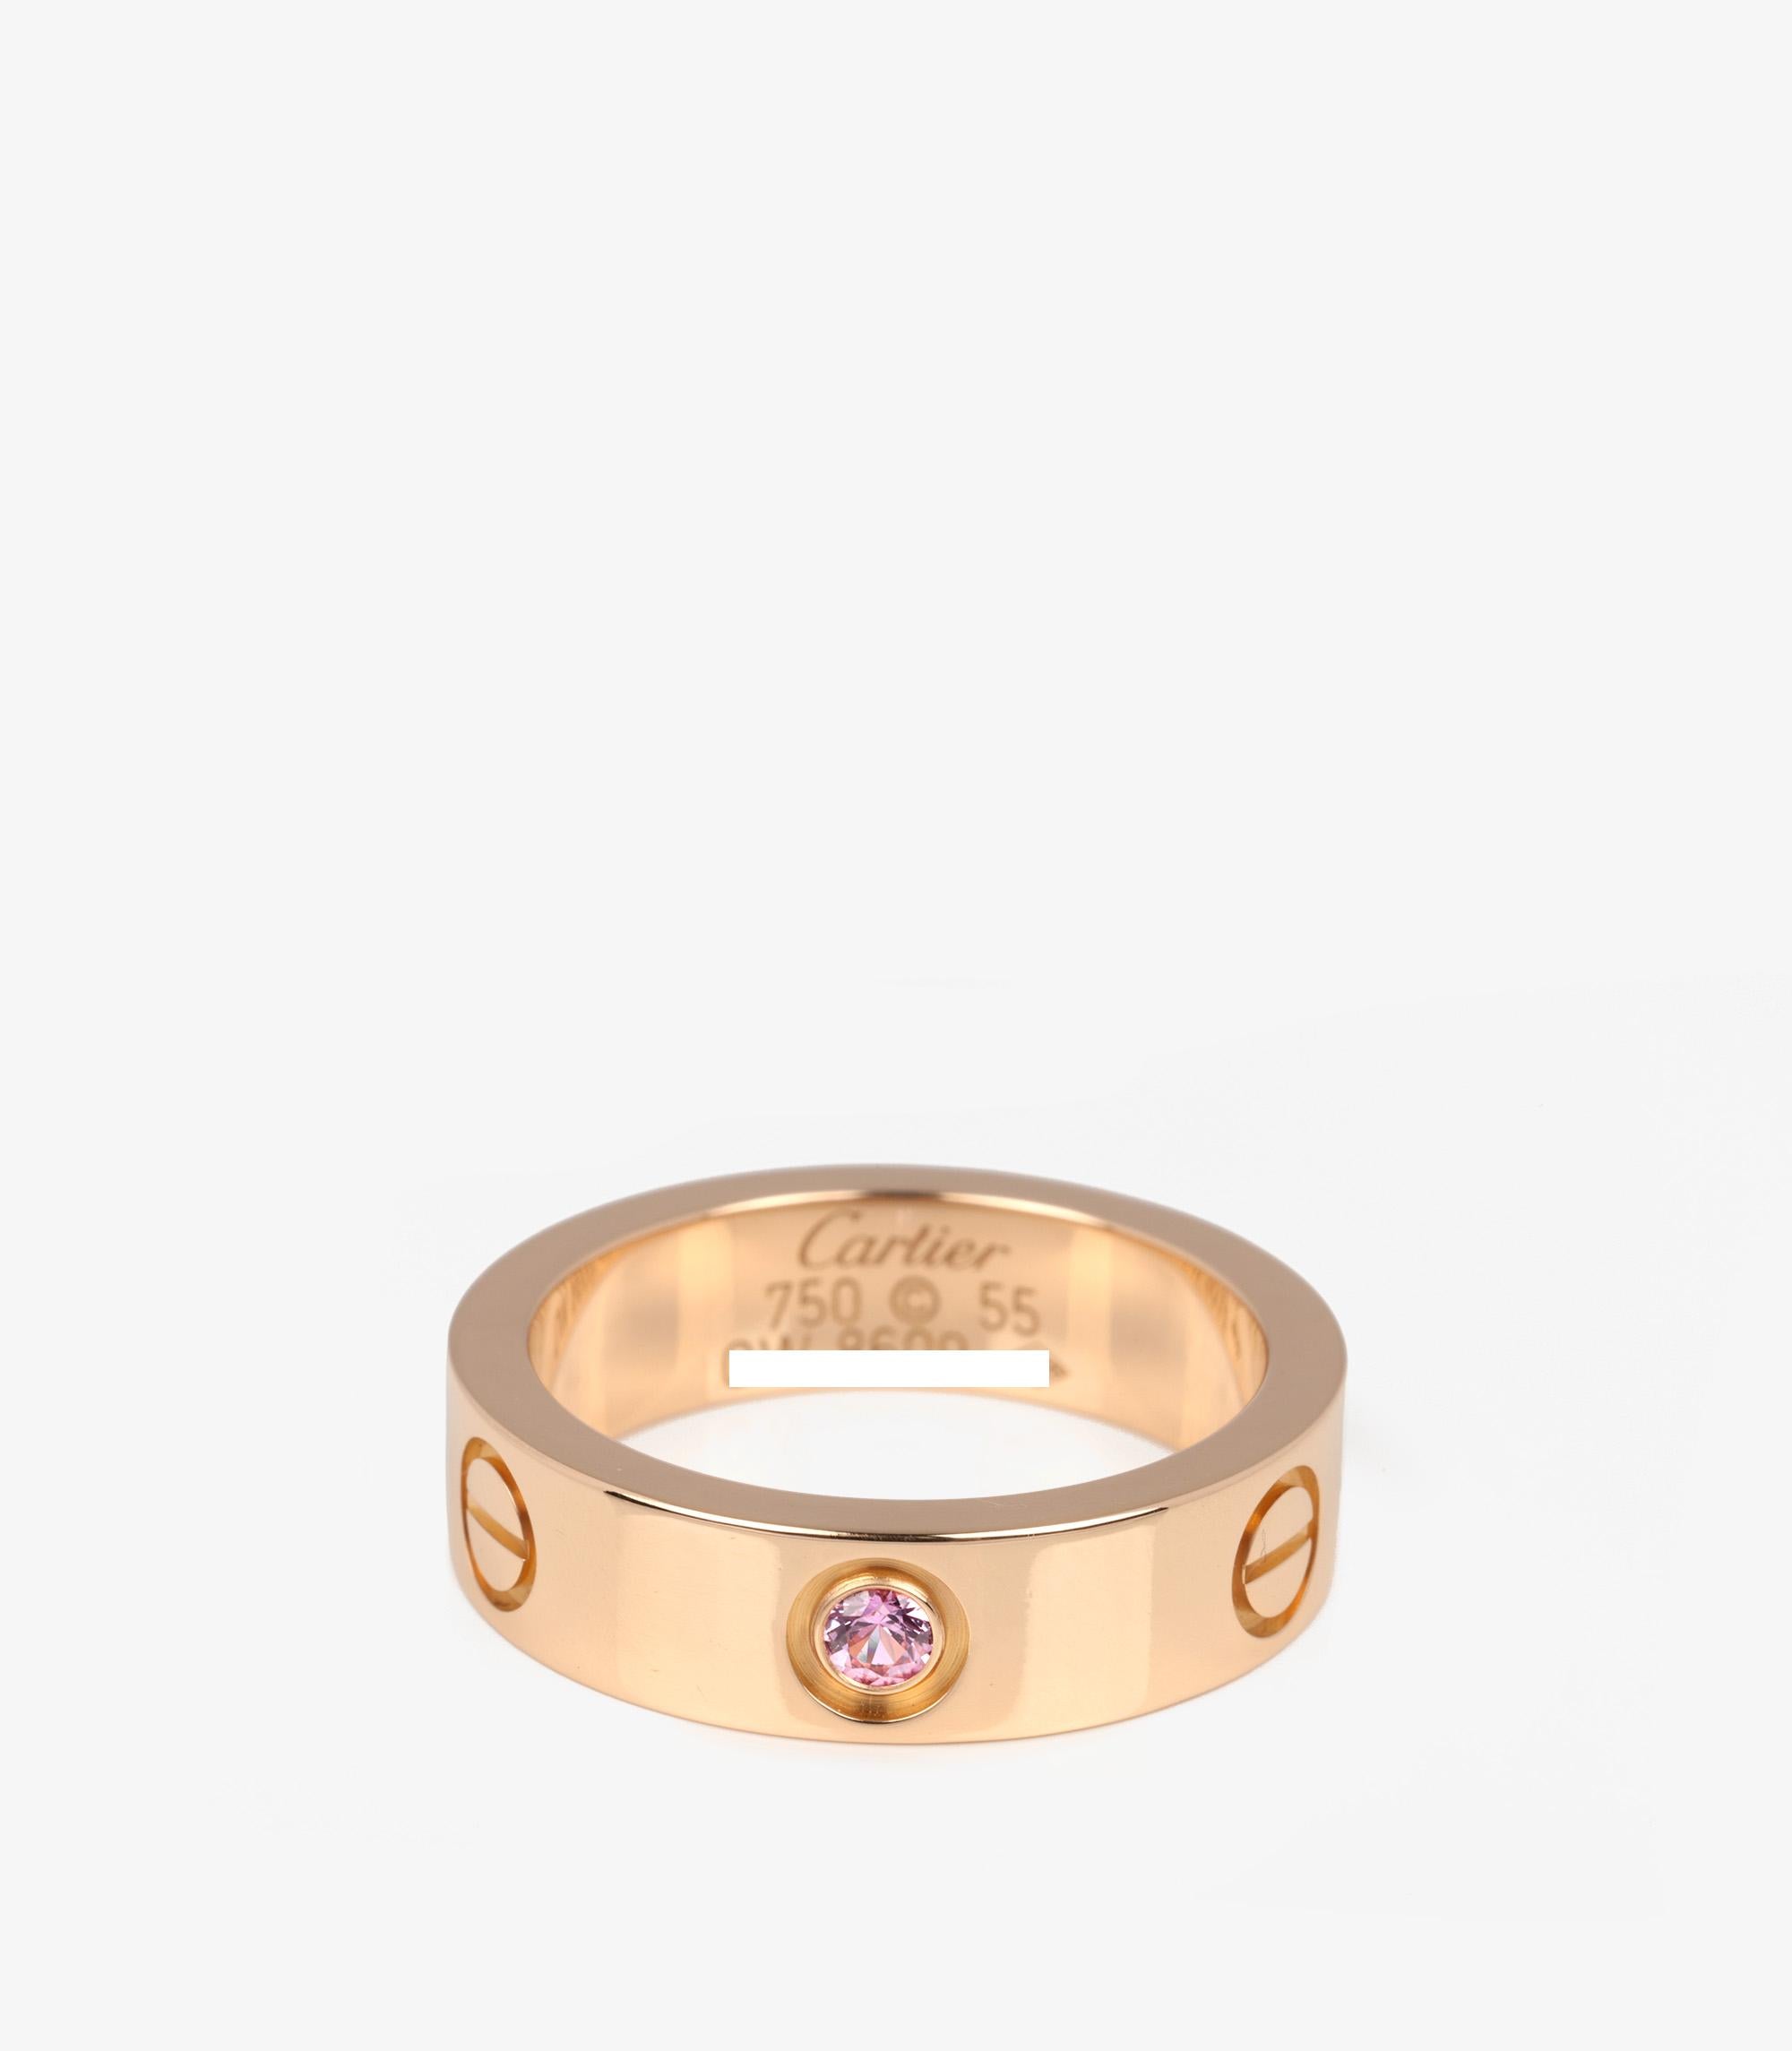 Cartier 1 Pink Sapphire 18ct Rose Gold Love Band Ring

Brand- Cartier
Model- 1 Sapphire Love Band Ring
Product Type- Ring
Serial Number- OW****
Age- Circa 2009
Accompanied By- Cartier Box, Certificate
Material(s)- 18ct Rose Gold
Gemstone-